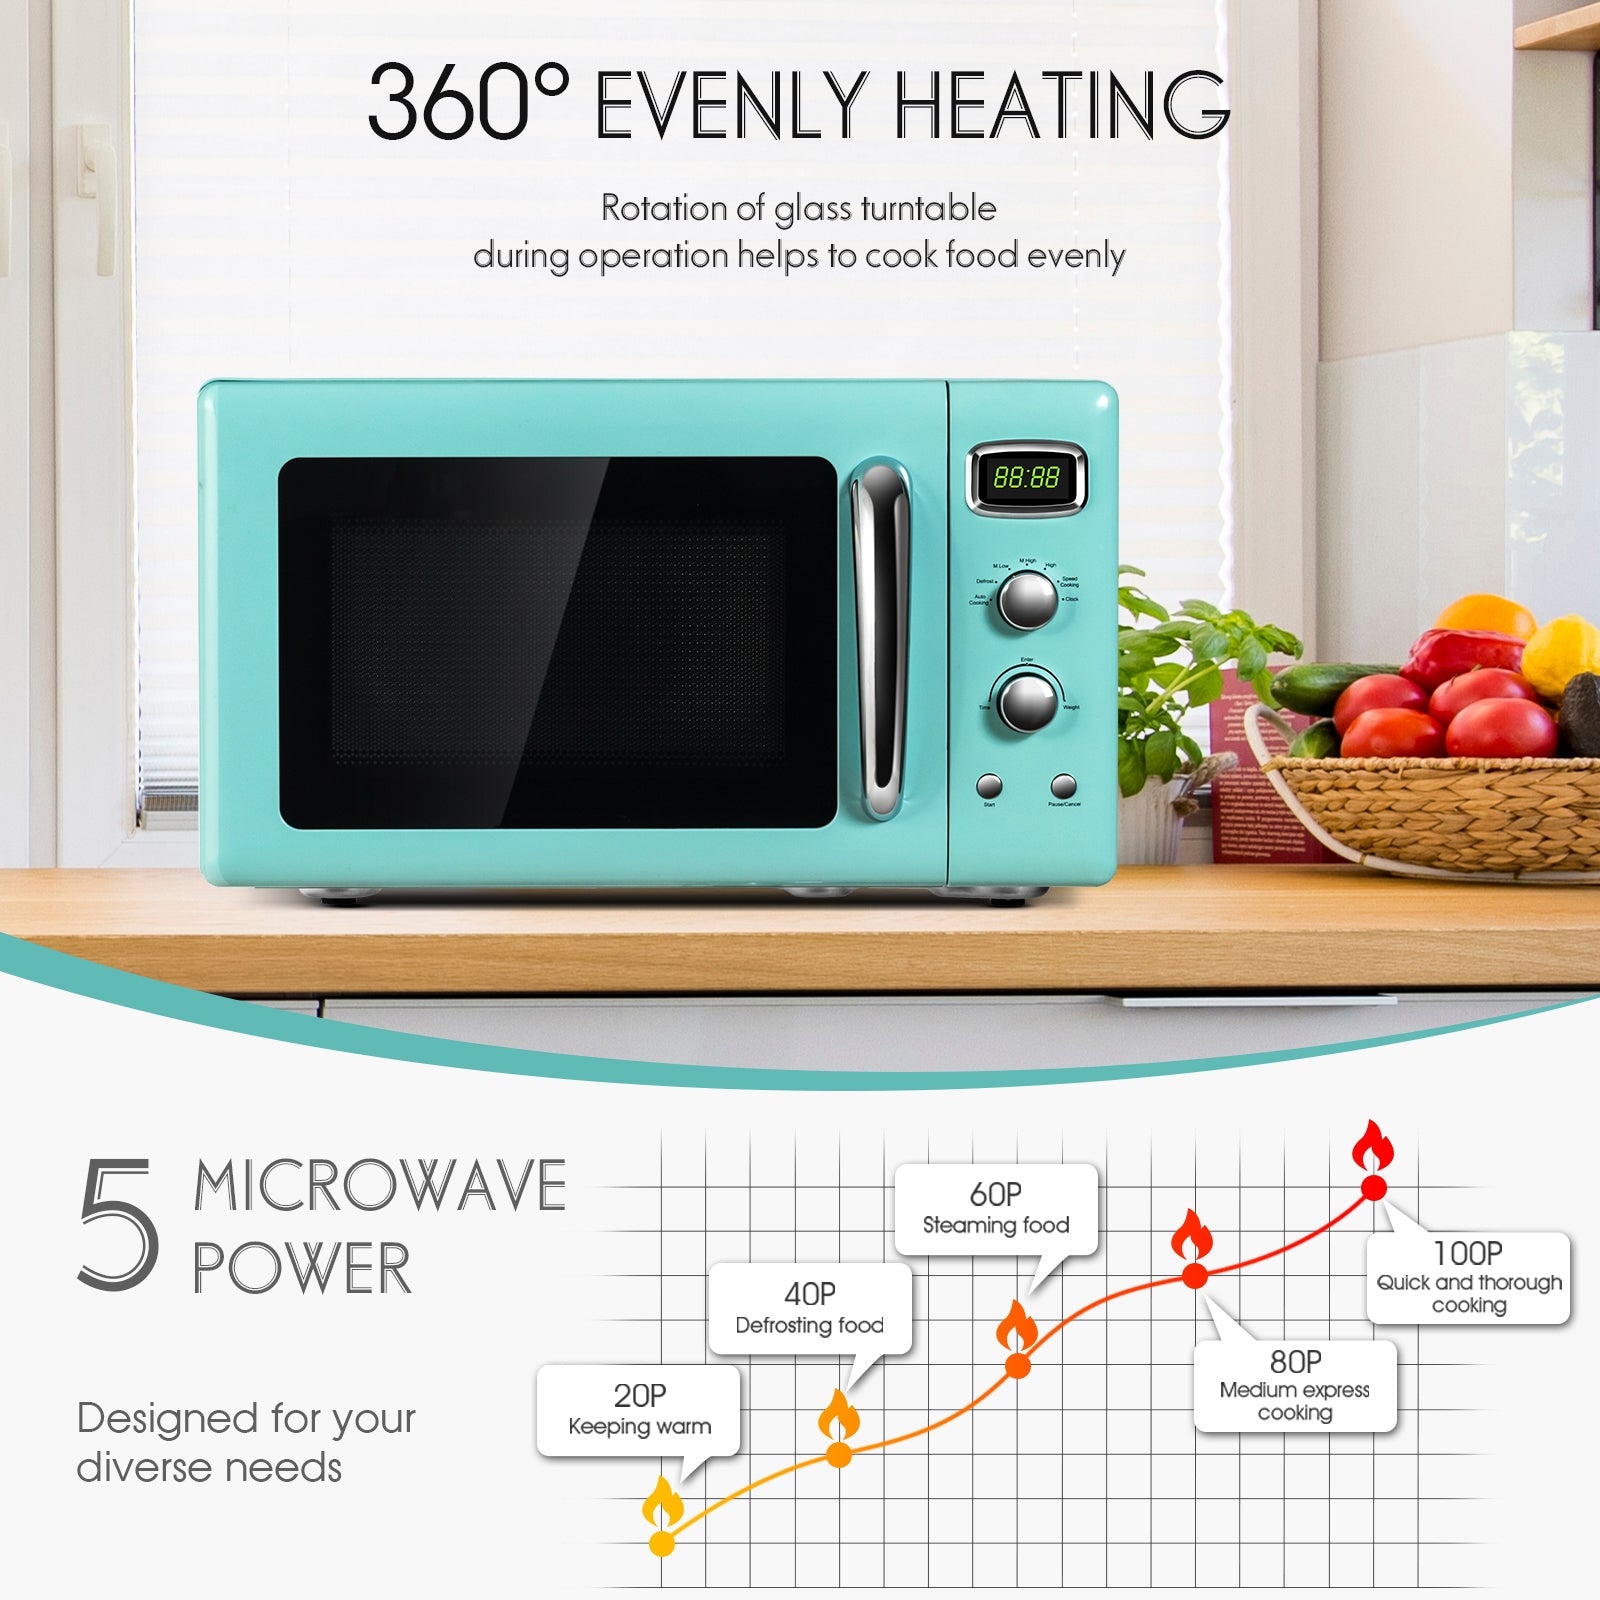 Experience versatile cooking options with 5 microwave power levels: Our microwave oven offers 5 power levels, including Defrost, m. Low (40p), m. High (80p), high (100p), and speed cooking, catering to all your cooking needs. Whether you want to keep food warm, defrost ingredients, or cook a delicious meal, this microwave oven has you covered.【Please note: This product is not available for sale in California.